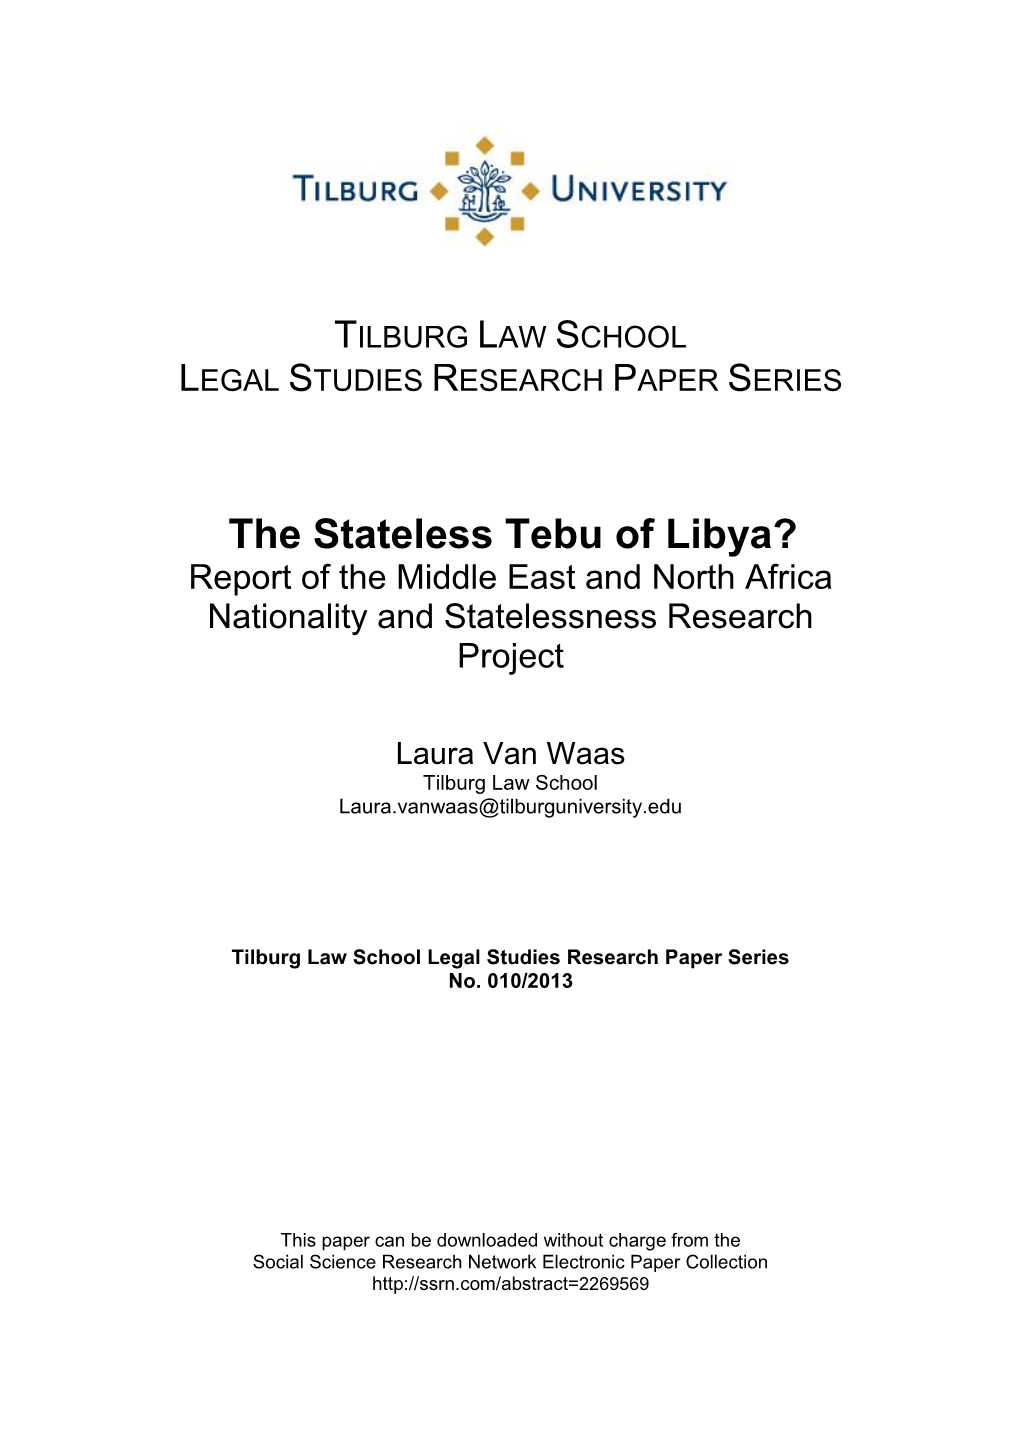 The Stateless Tebu of Libya? Report of the Middle East and North Africa Nationality and Statelessness Research Project